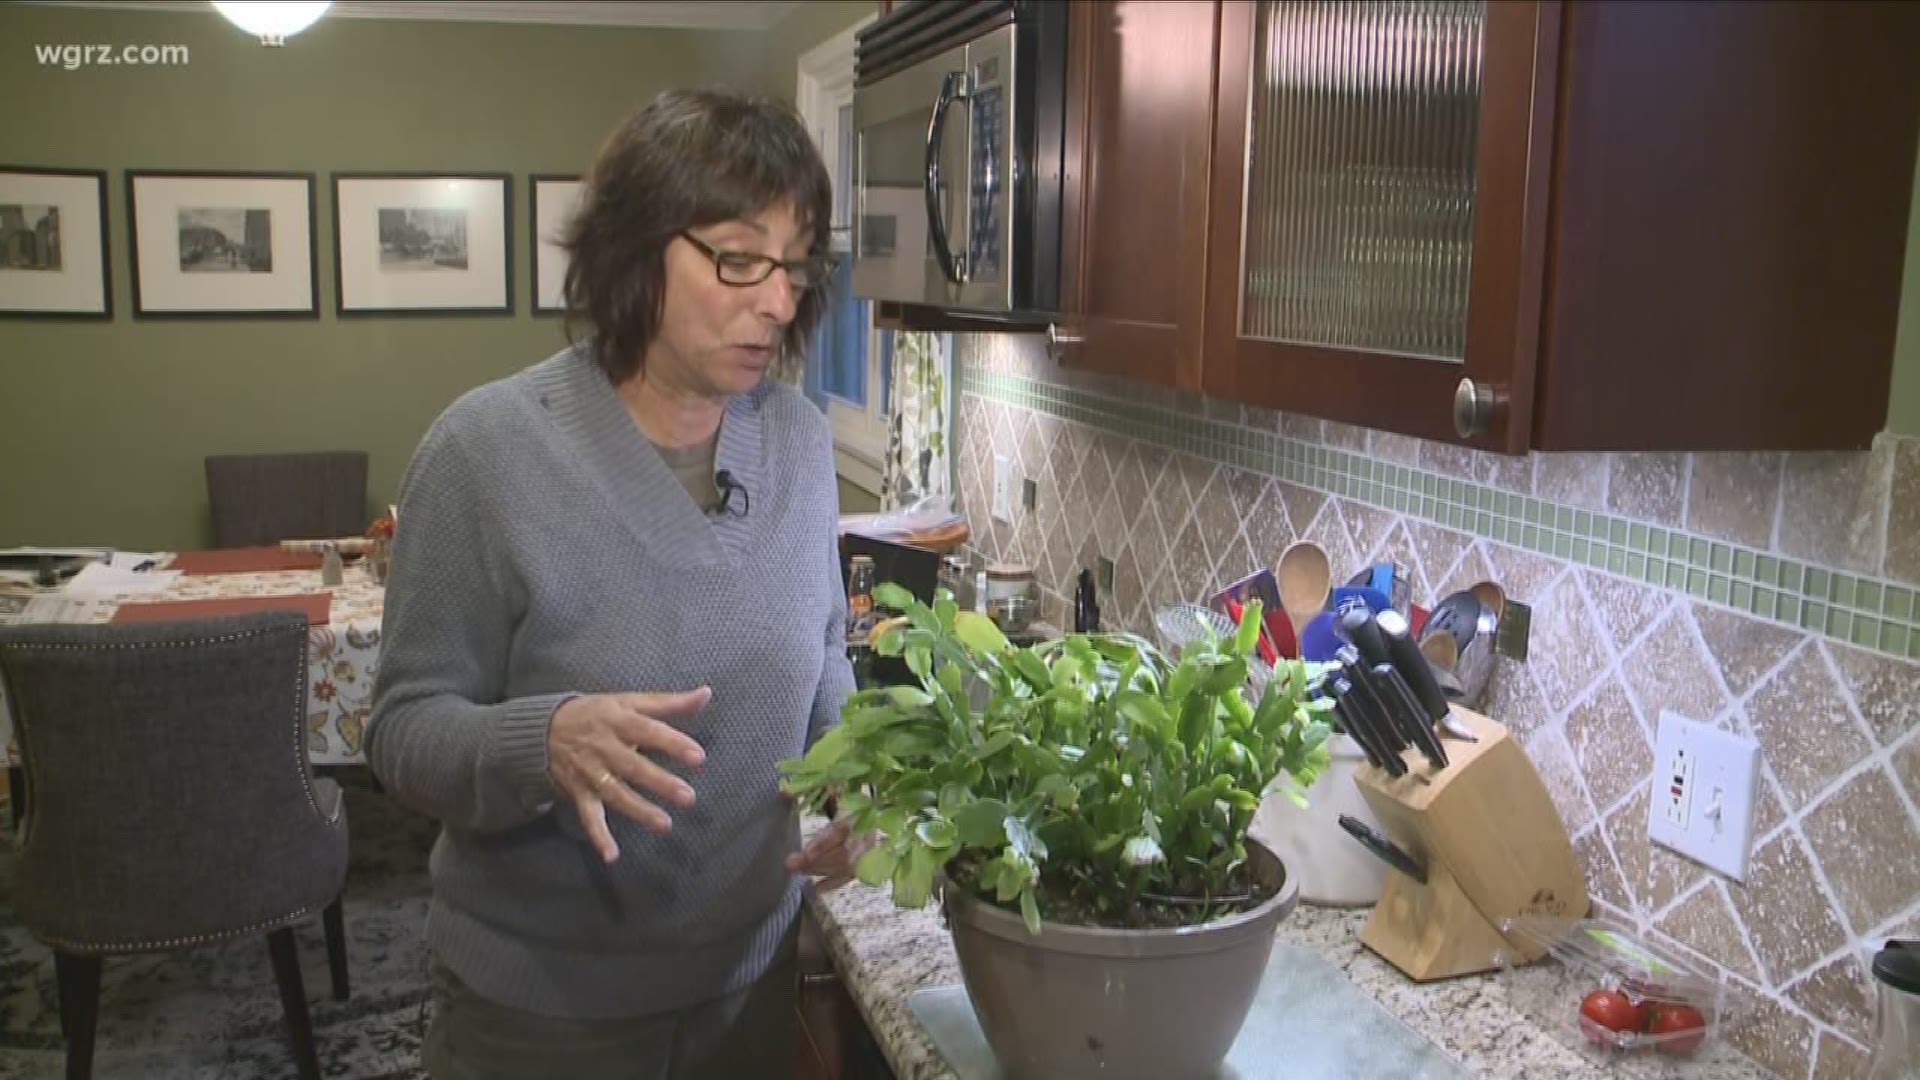 Instead of letting plants freeze outside, they could be inside blossoming. Jackie explains in this week's 2 The Garden.